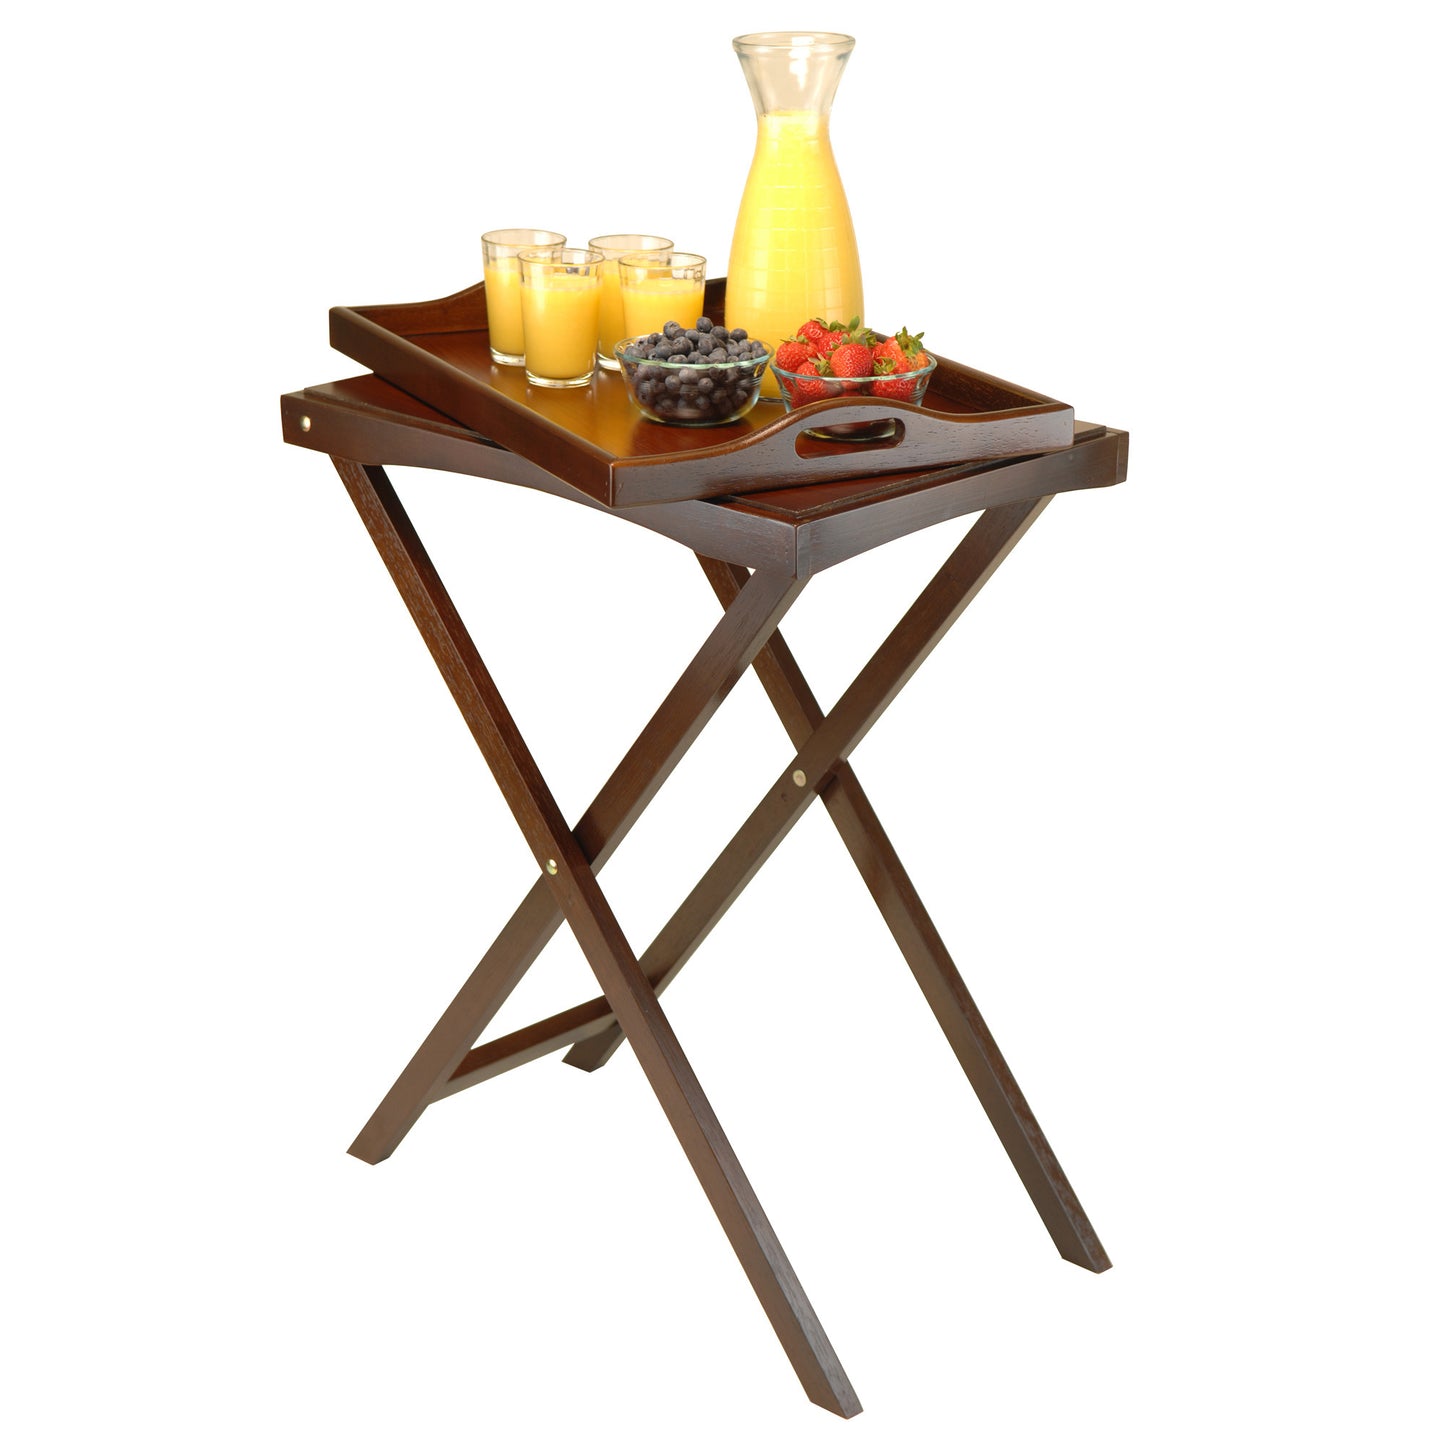 Devon Butler Table with Serving Tray